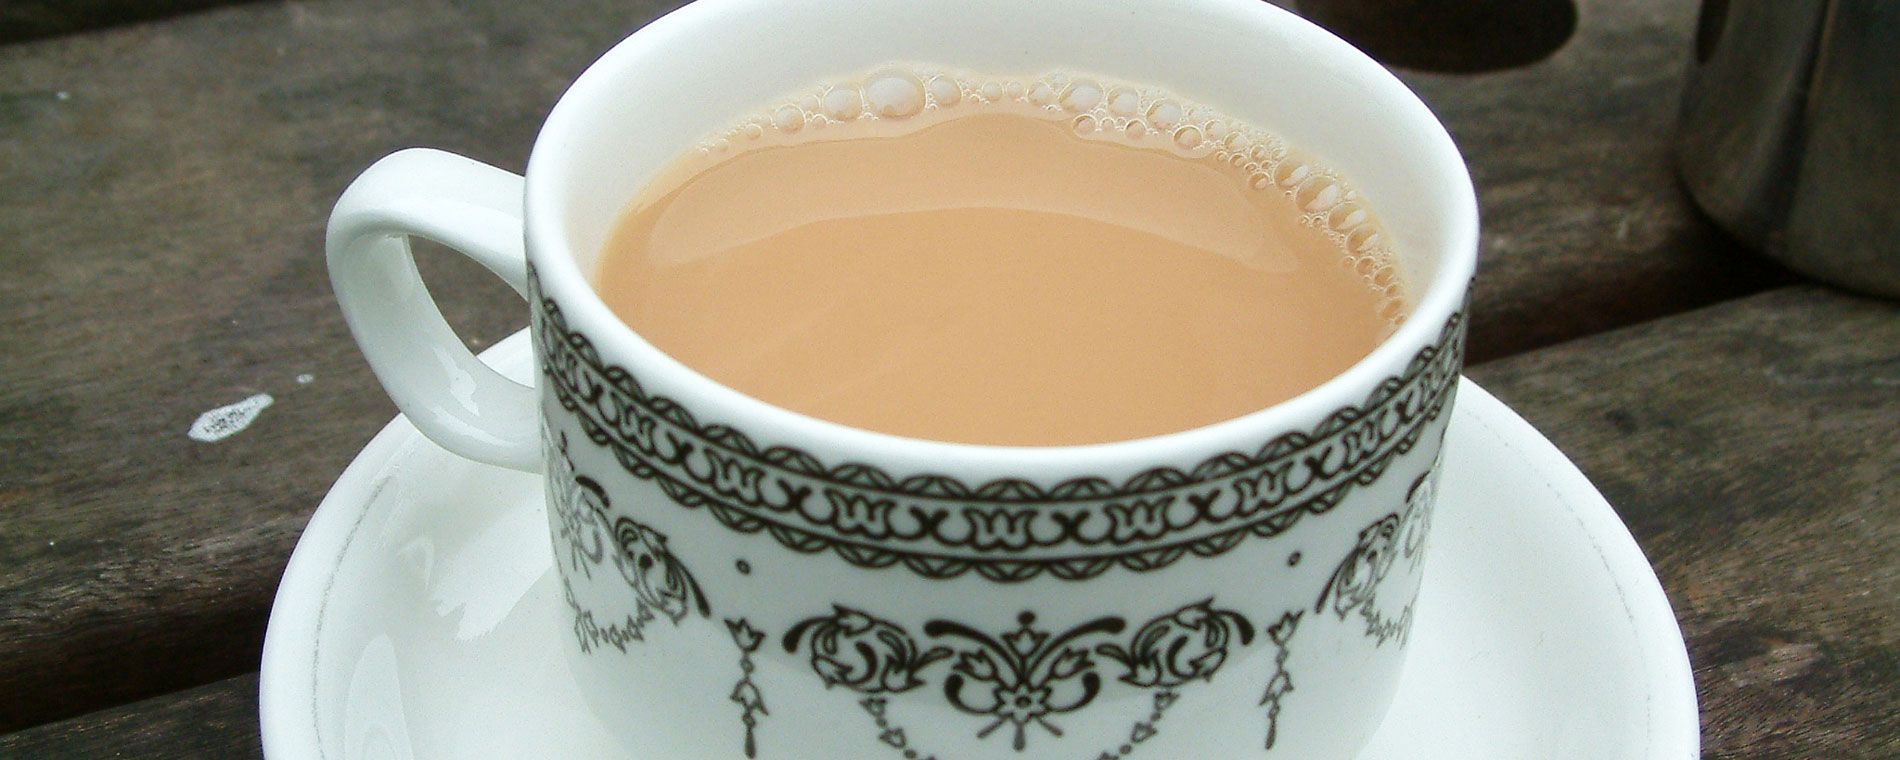 This Is How Many Extra Calories You Consume From Taking Your Tea With Sugar